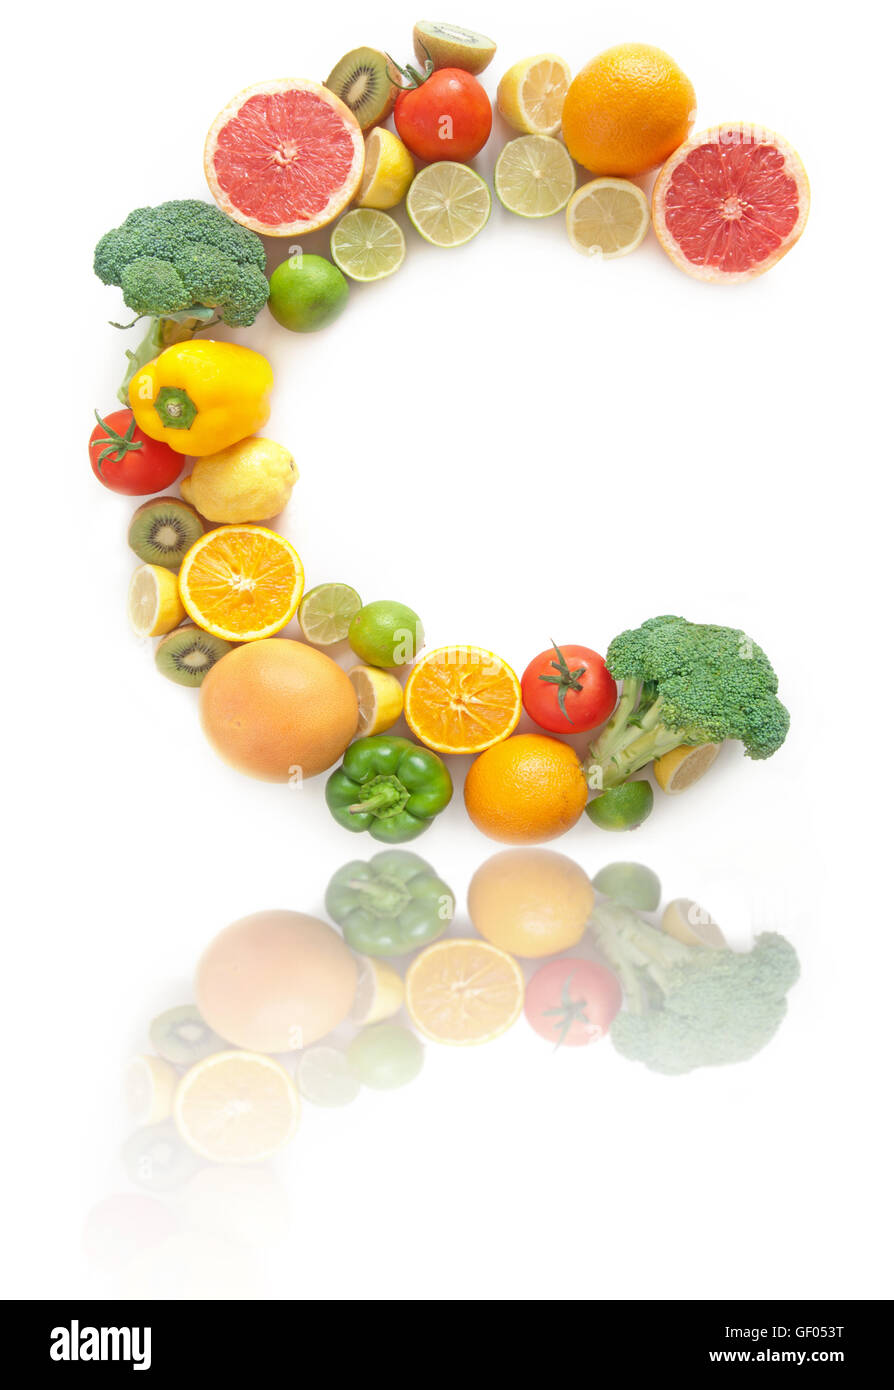 C shape letter made from fruits and vegetables high in vitamin C Stock Photo